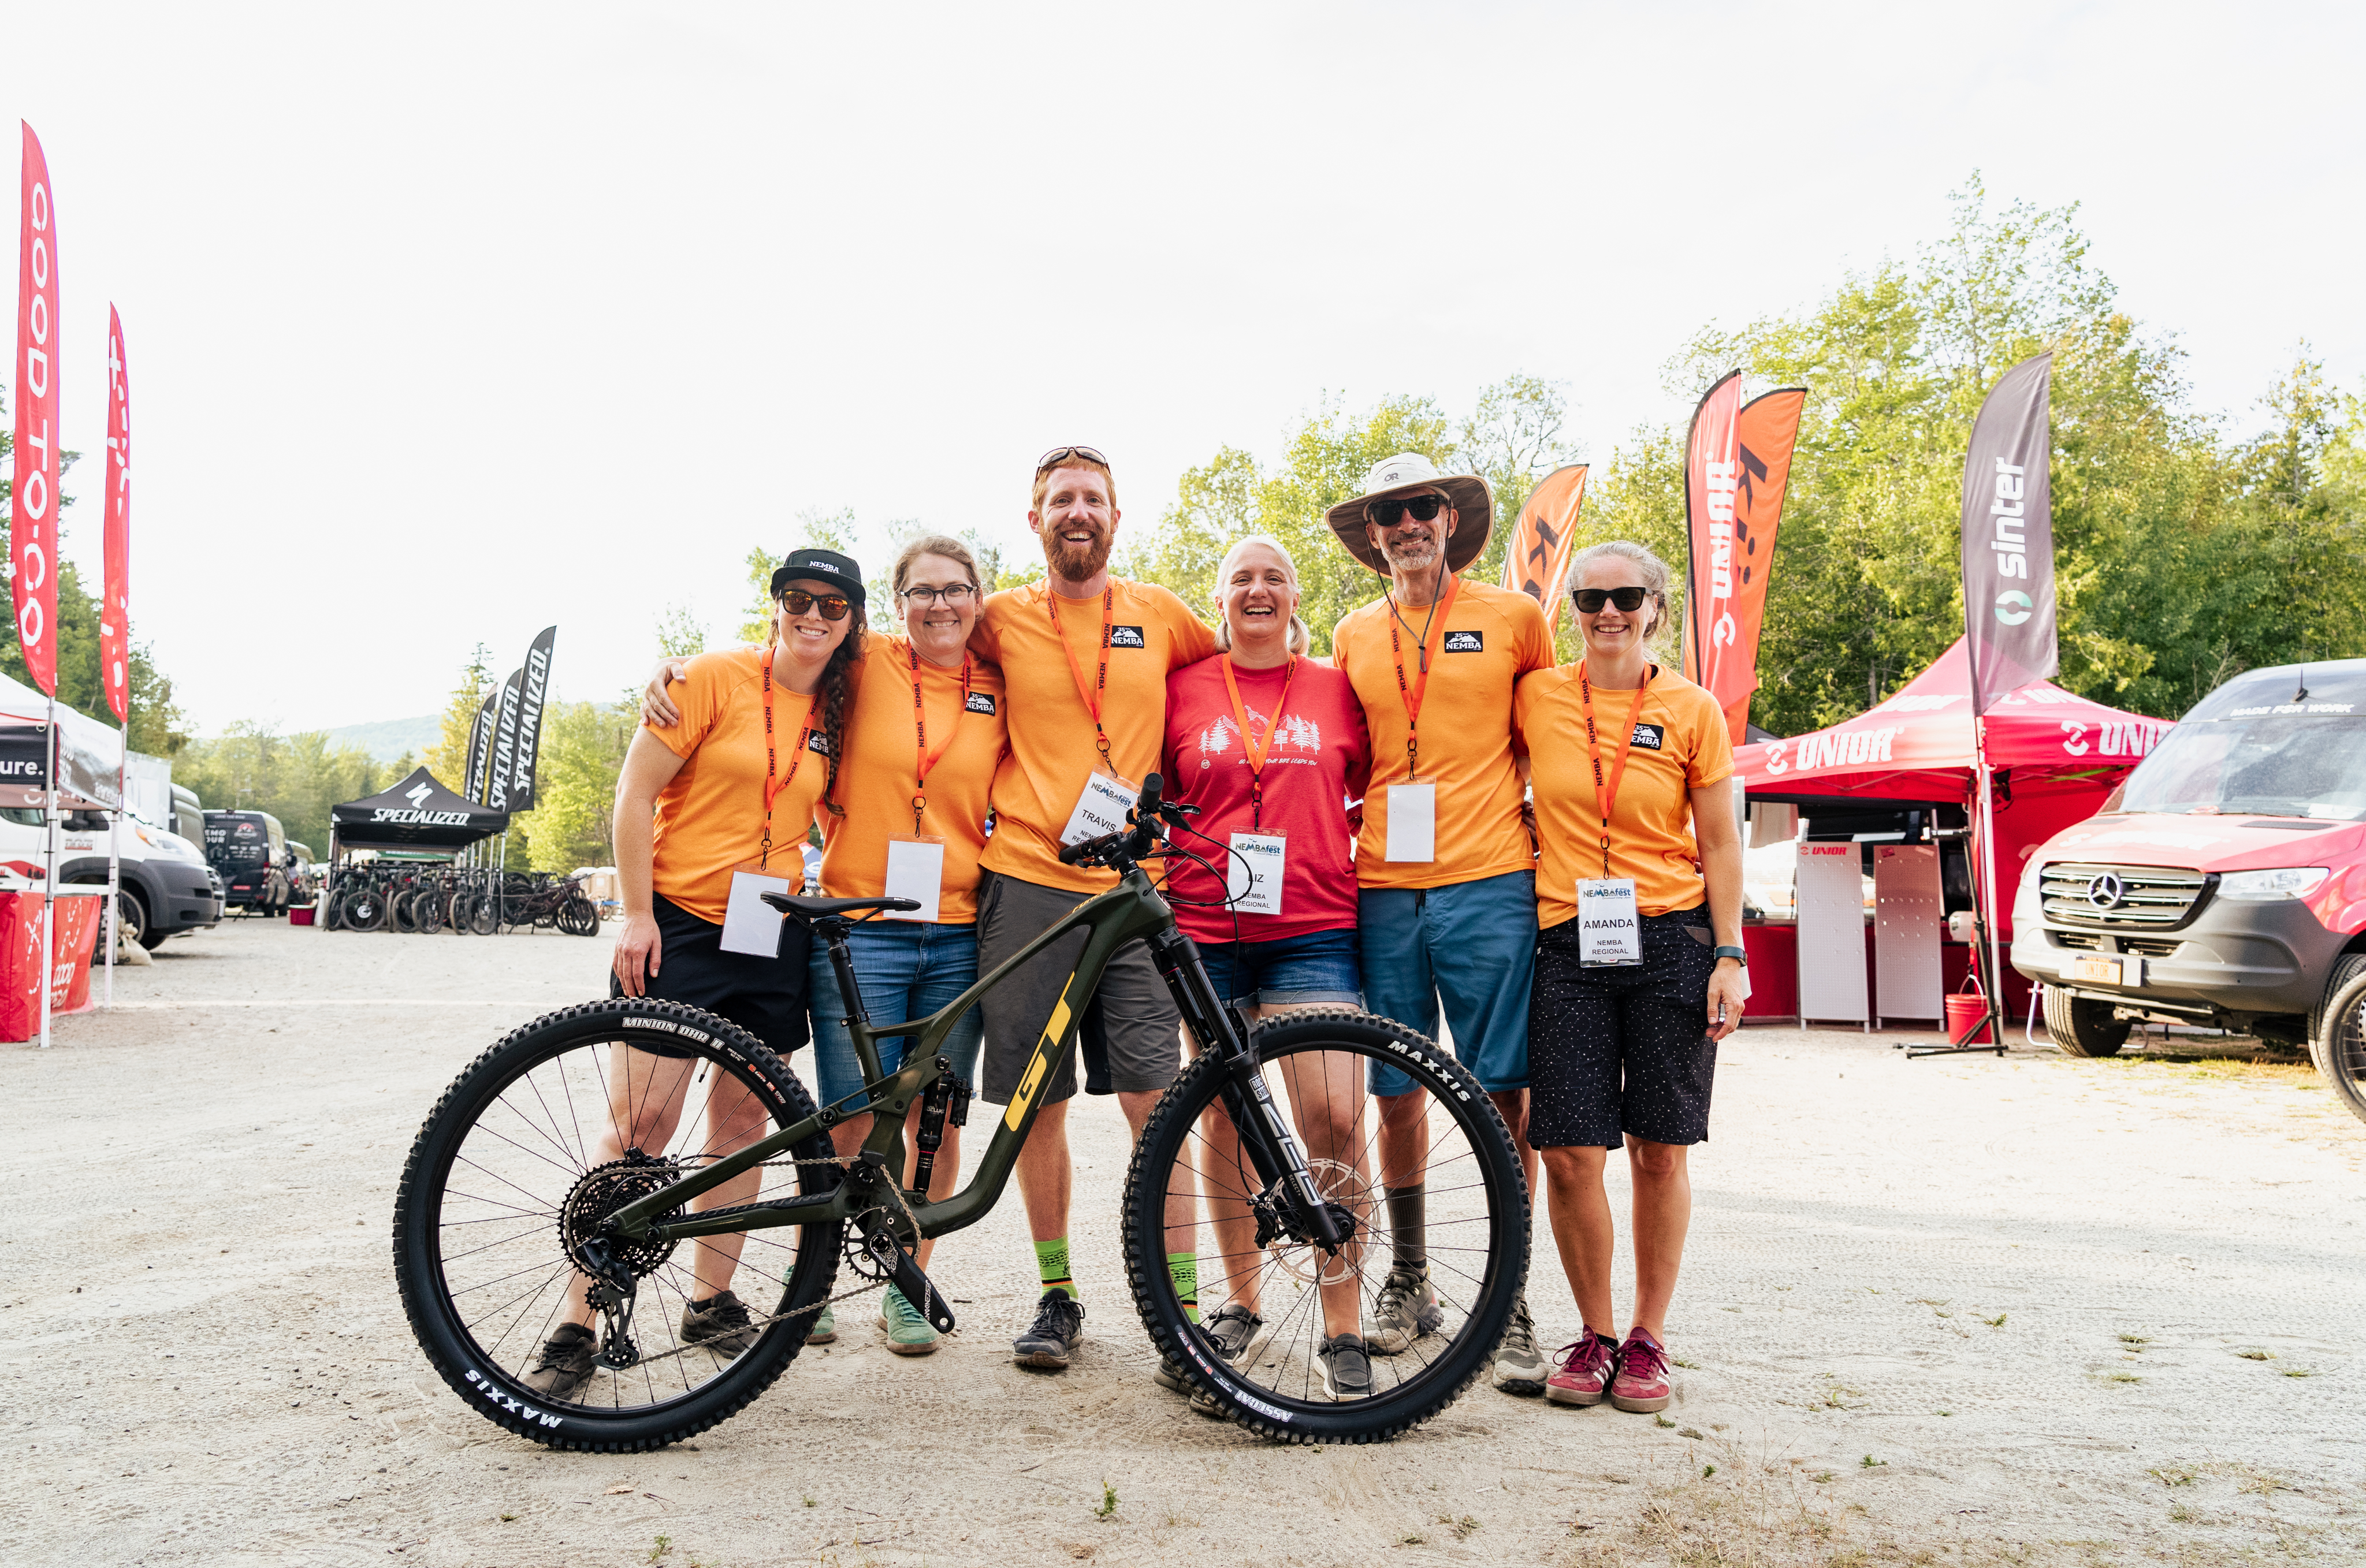 6 NEMBA Members at a NEMBA event standing and posing for a picture with a mountain bike.